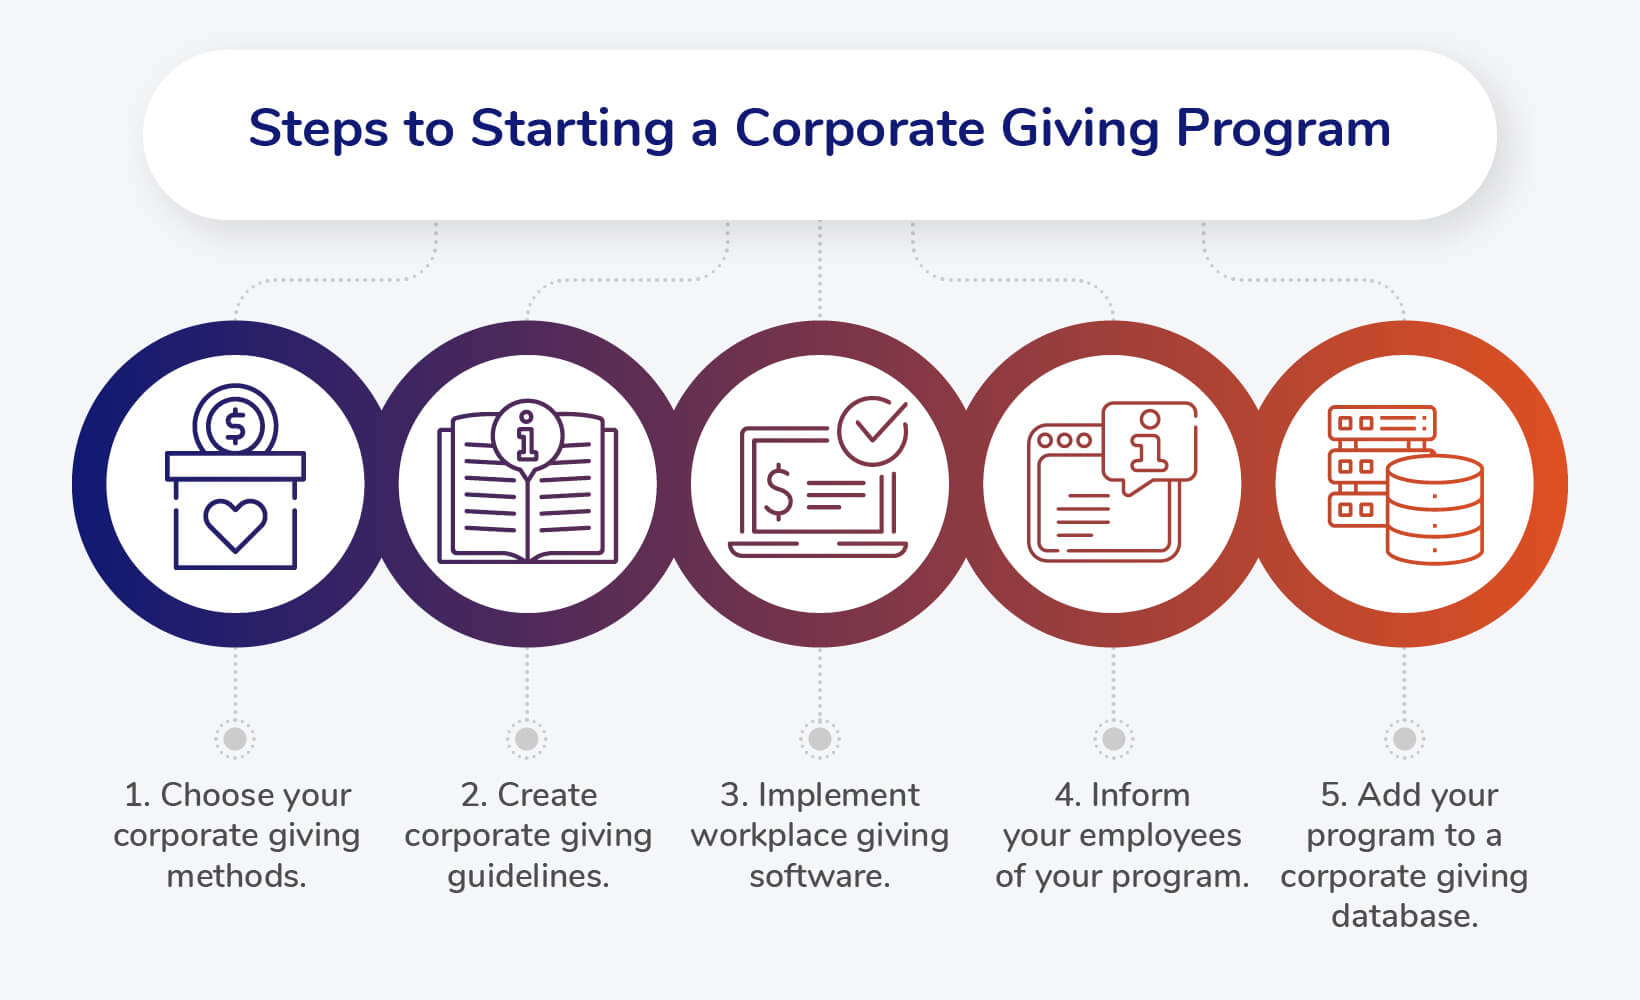 This image shows the steps companies can follow to set up a corporate giving program, as outlined in the text below.